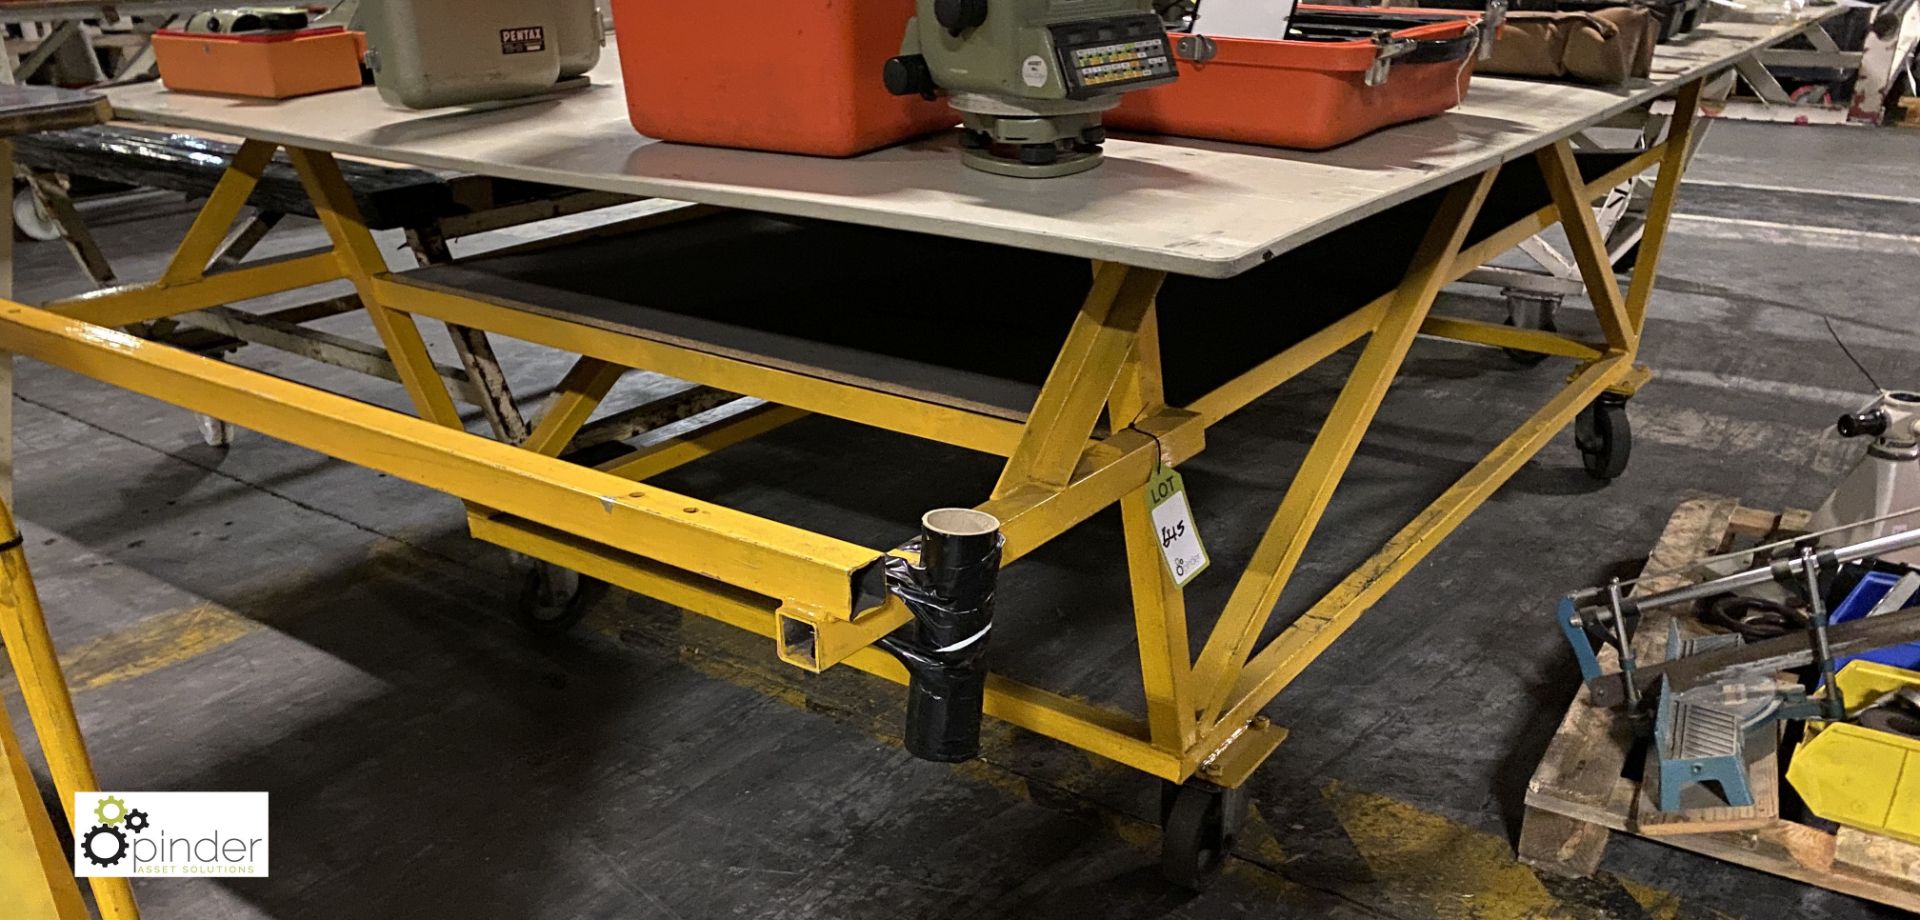 Steel fabricated mobile Workbench, 2845mm x 1700mm - Image 2 of 3